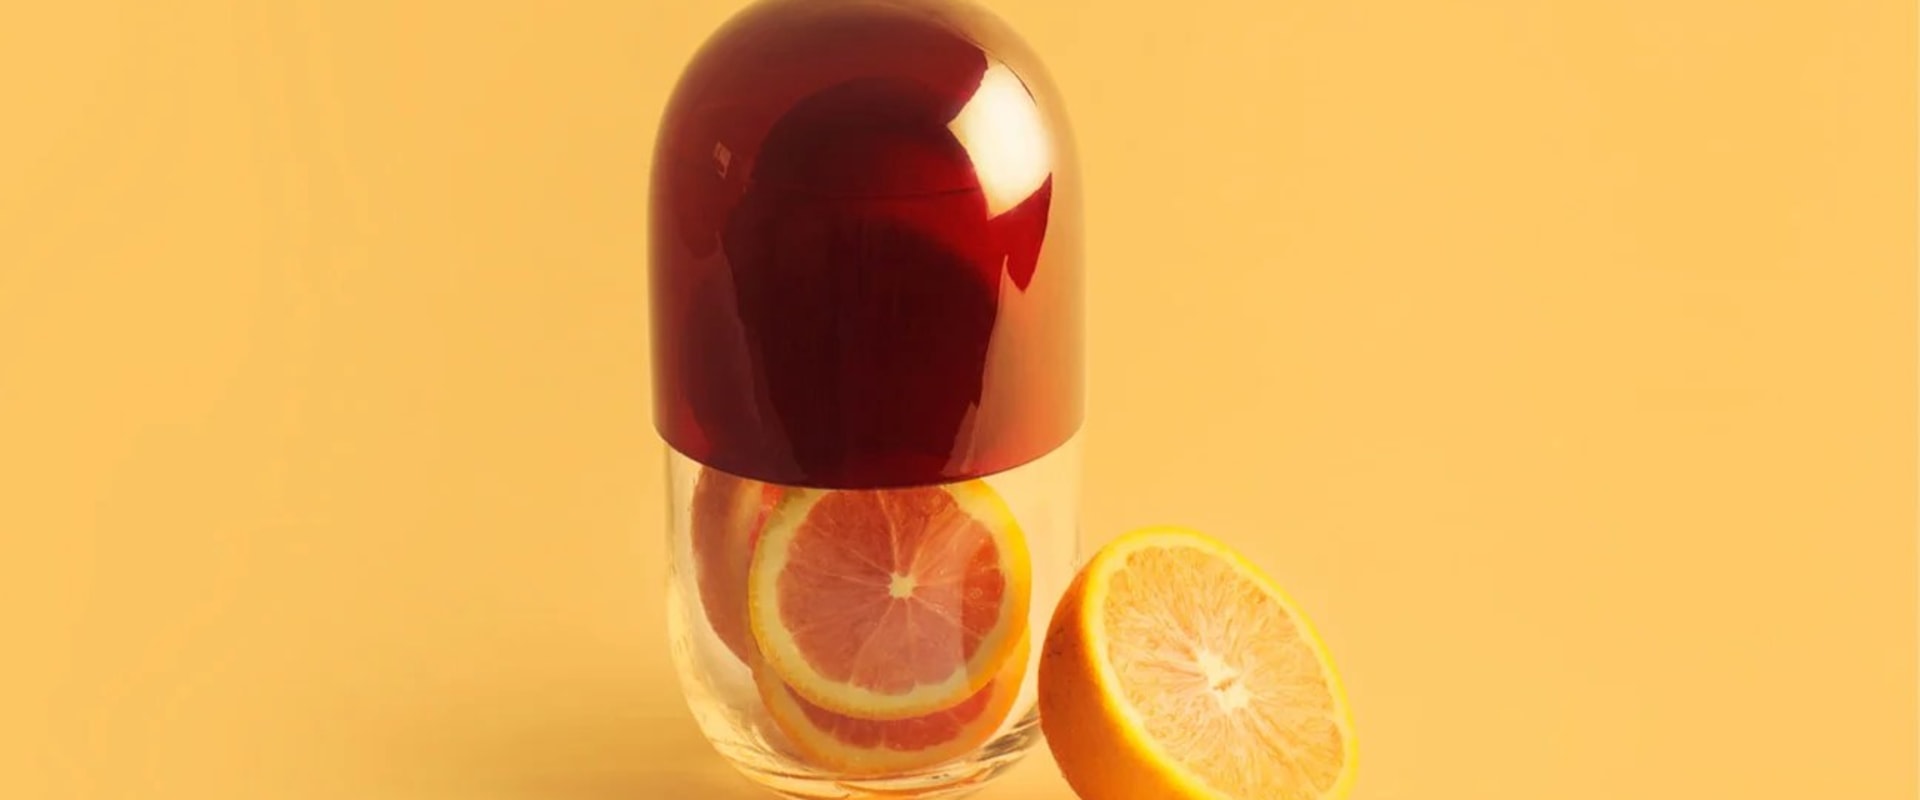 Vitamin C Reviews: What You Need to Know